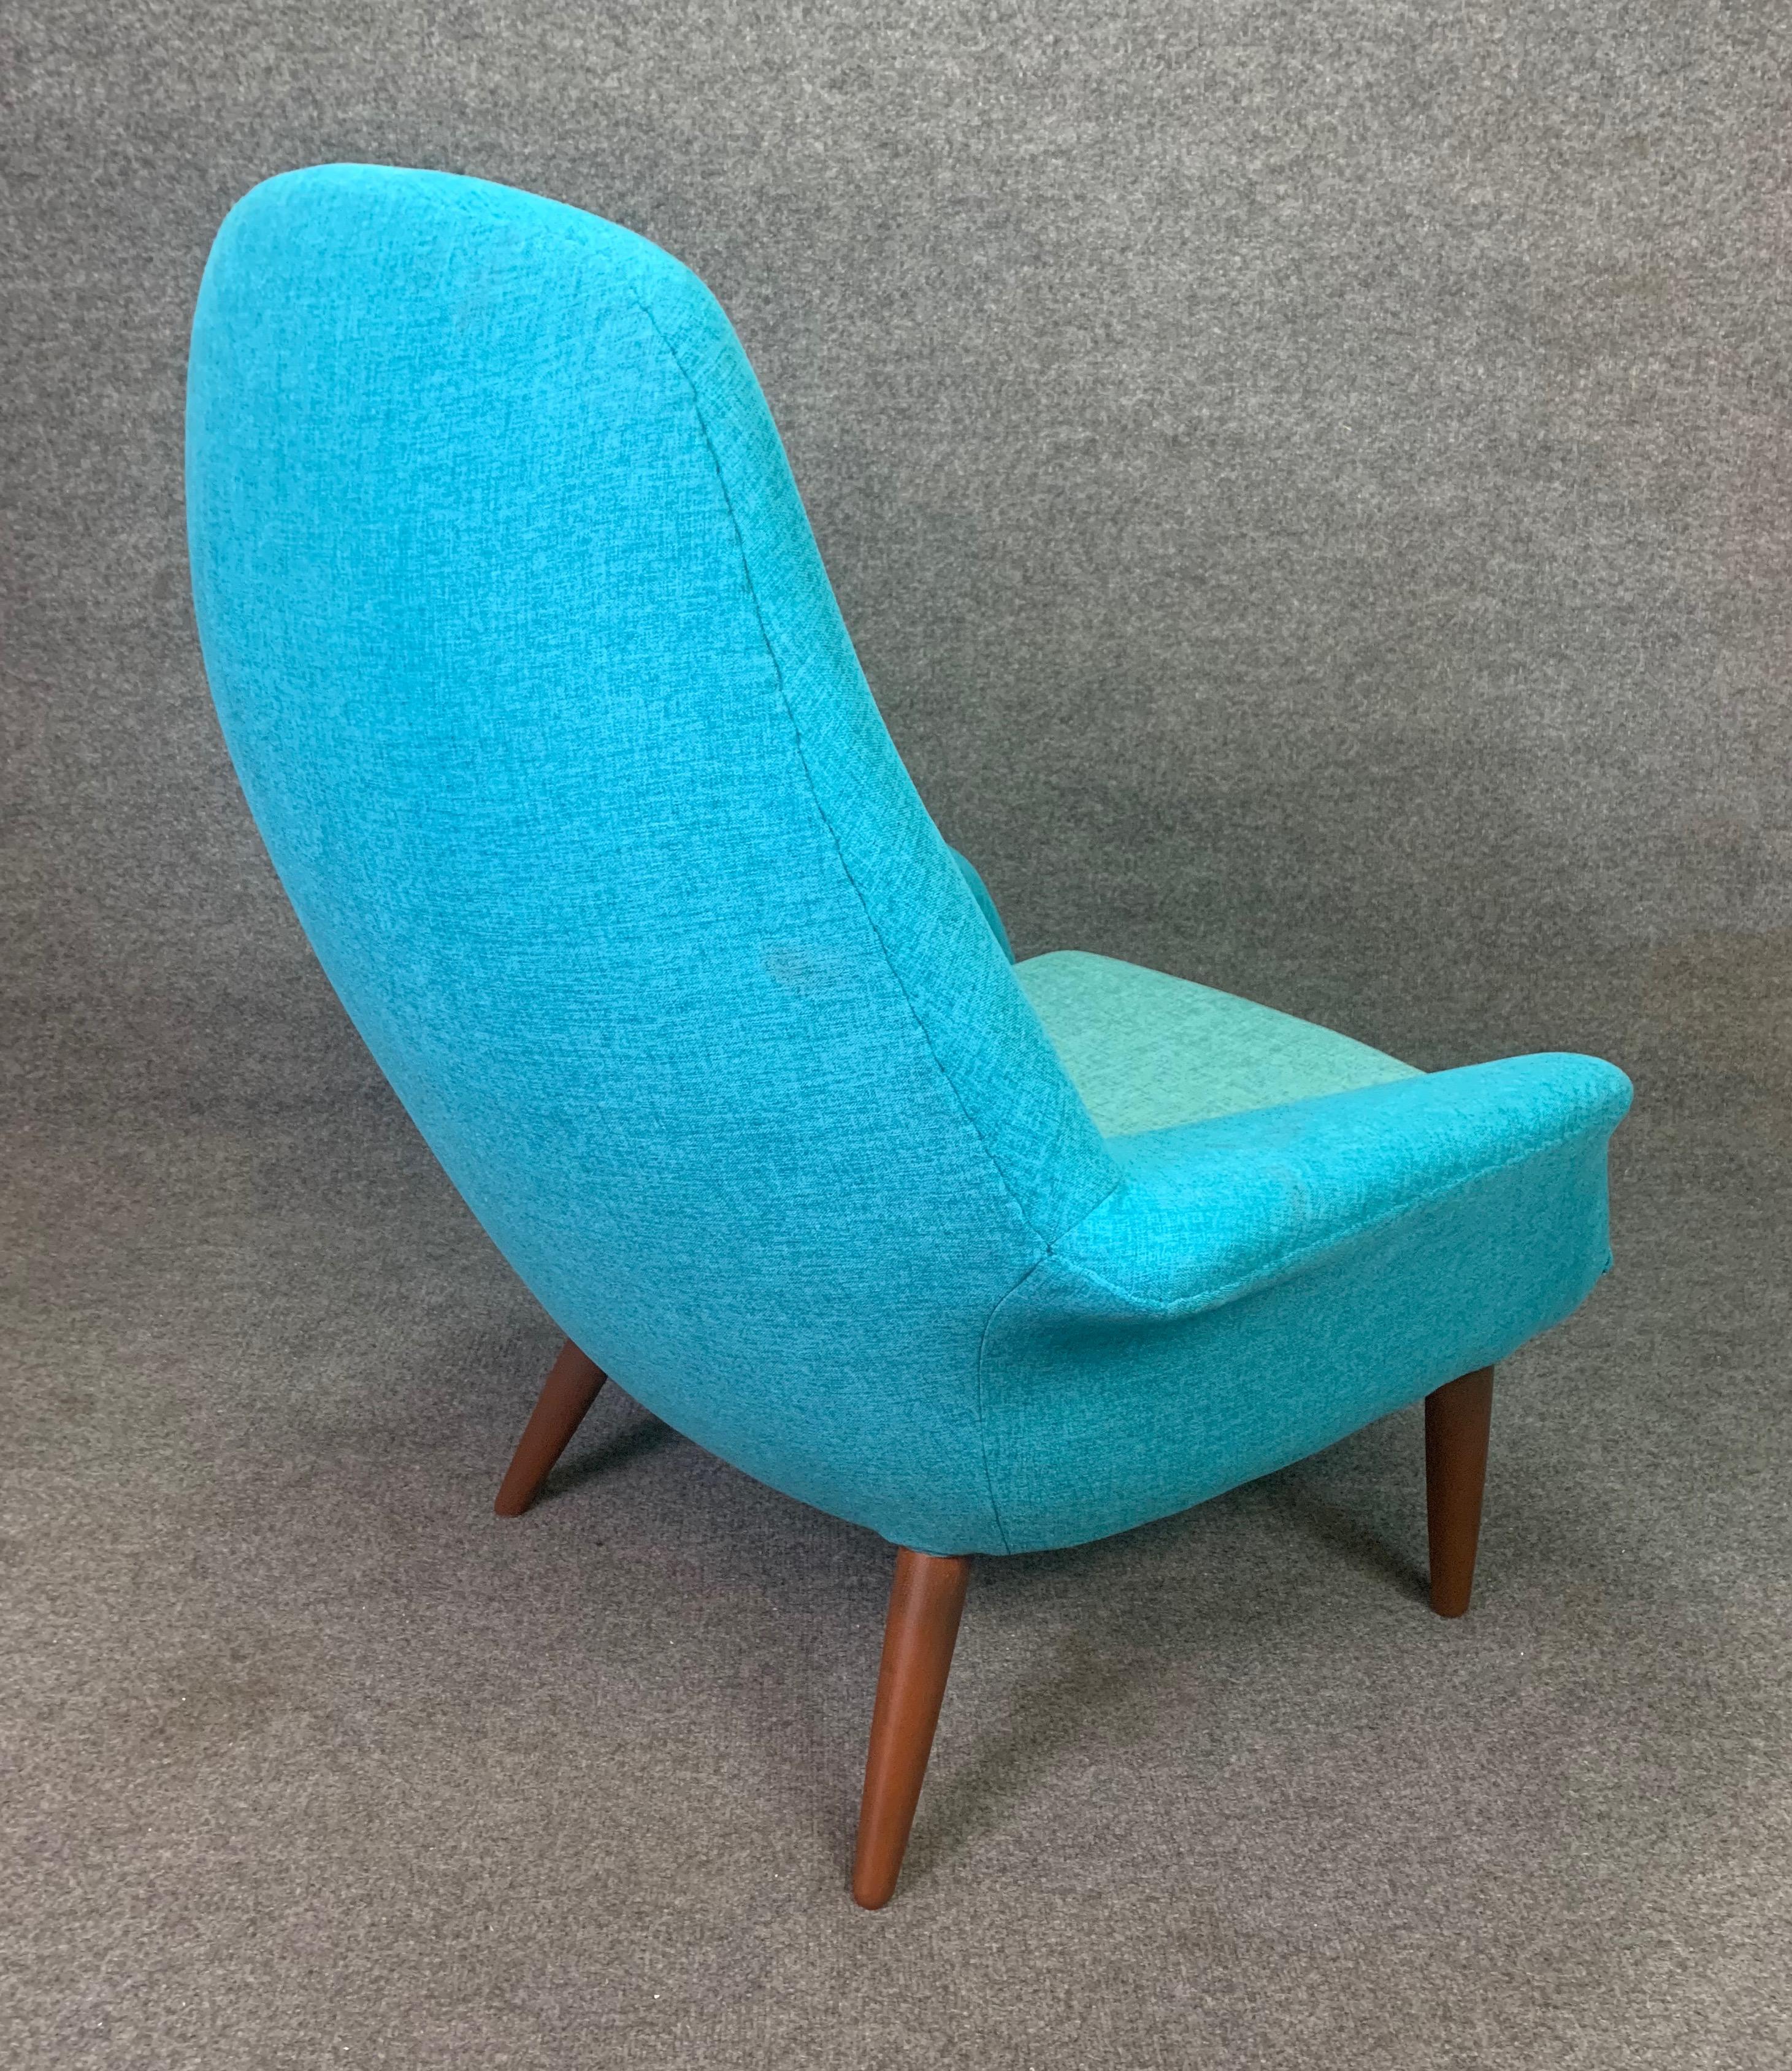 Vintage Scandinavian Mid-Century Modern Lounge Chair by Broderna Anderssons For Sale 1